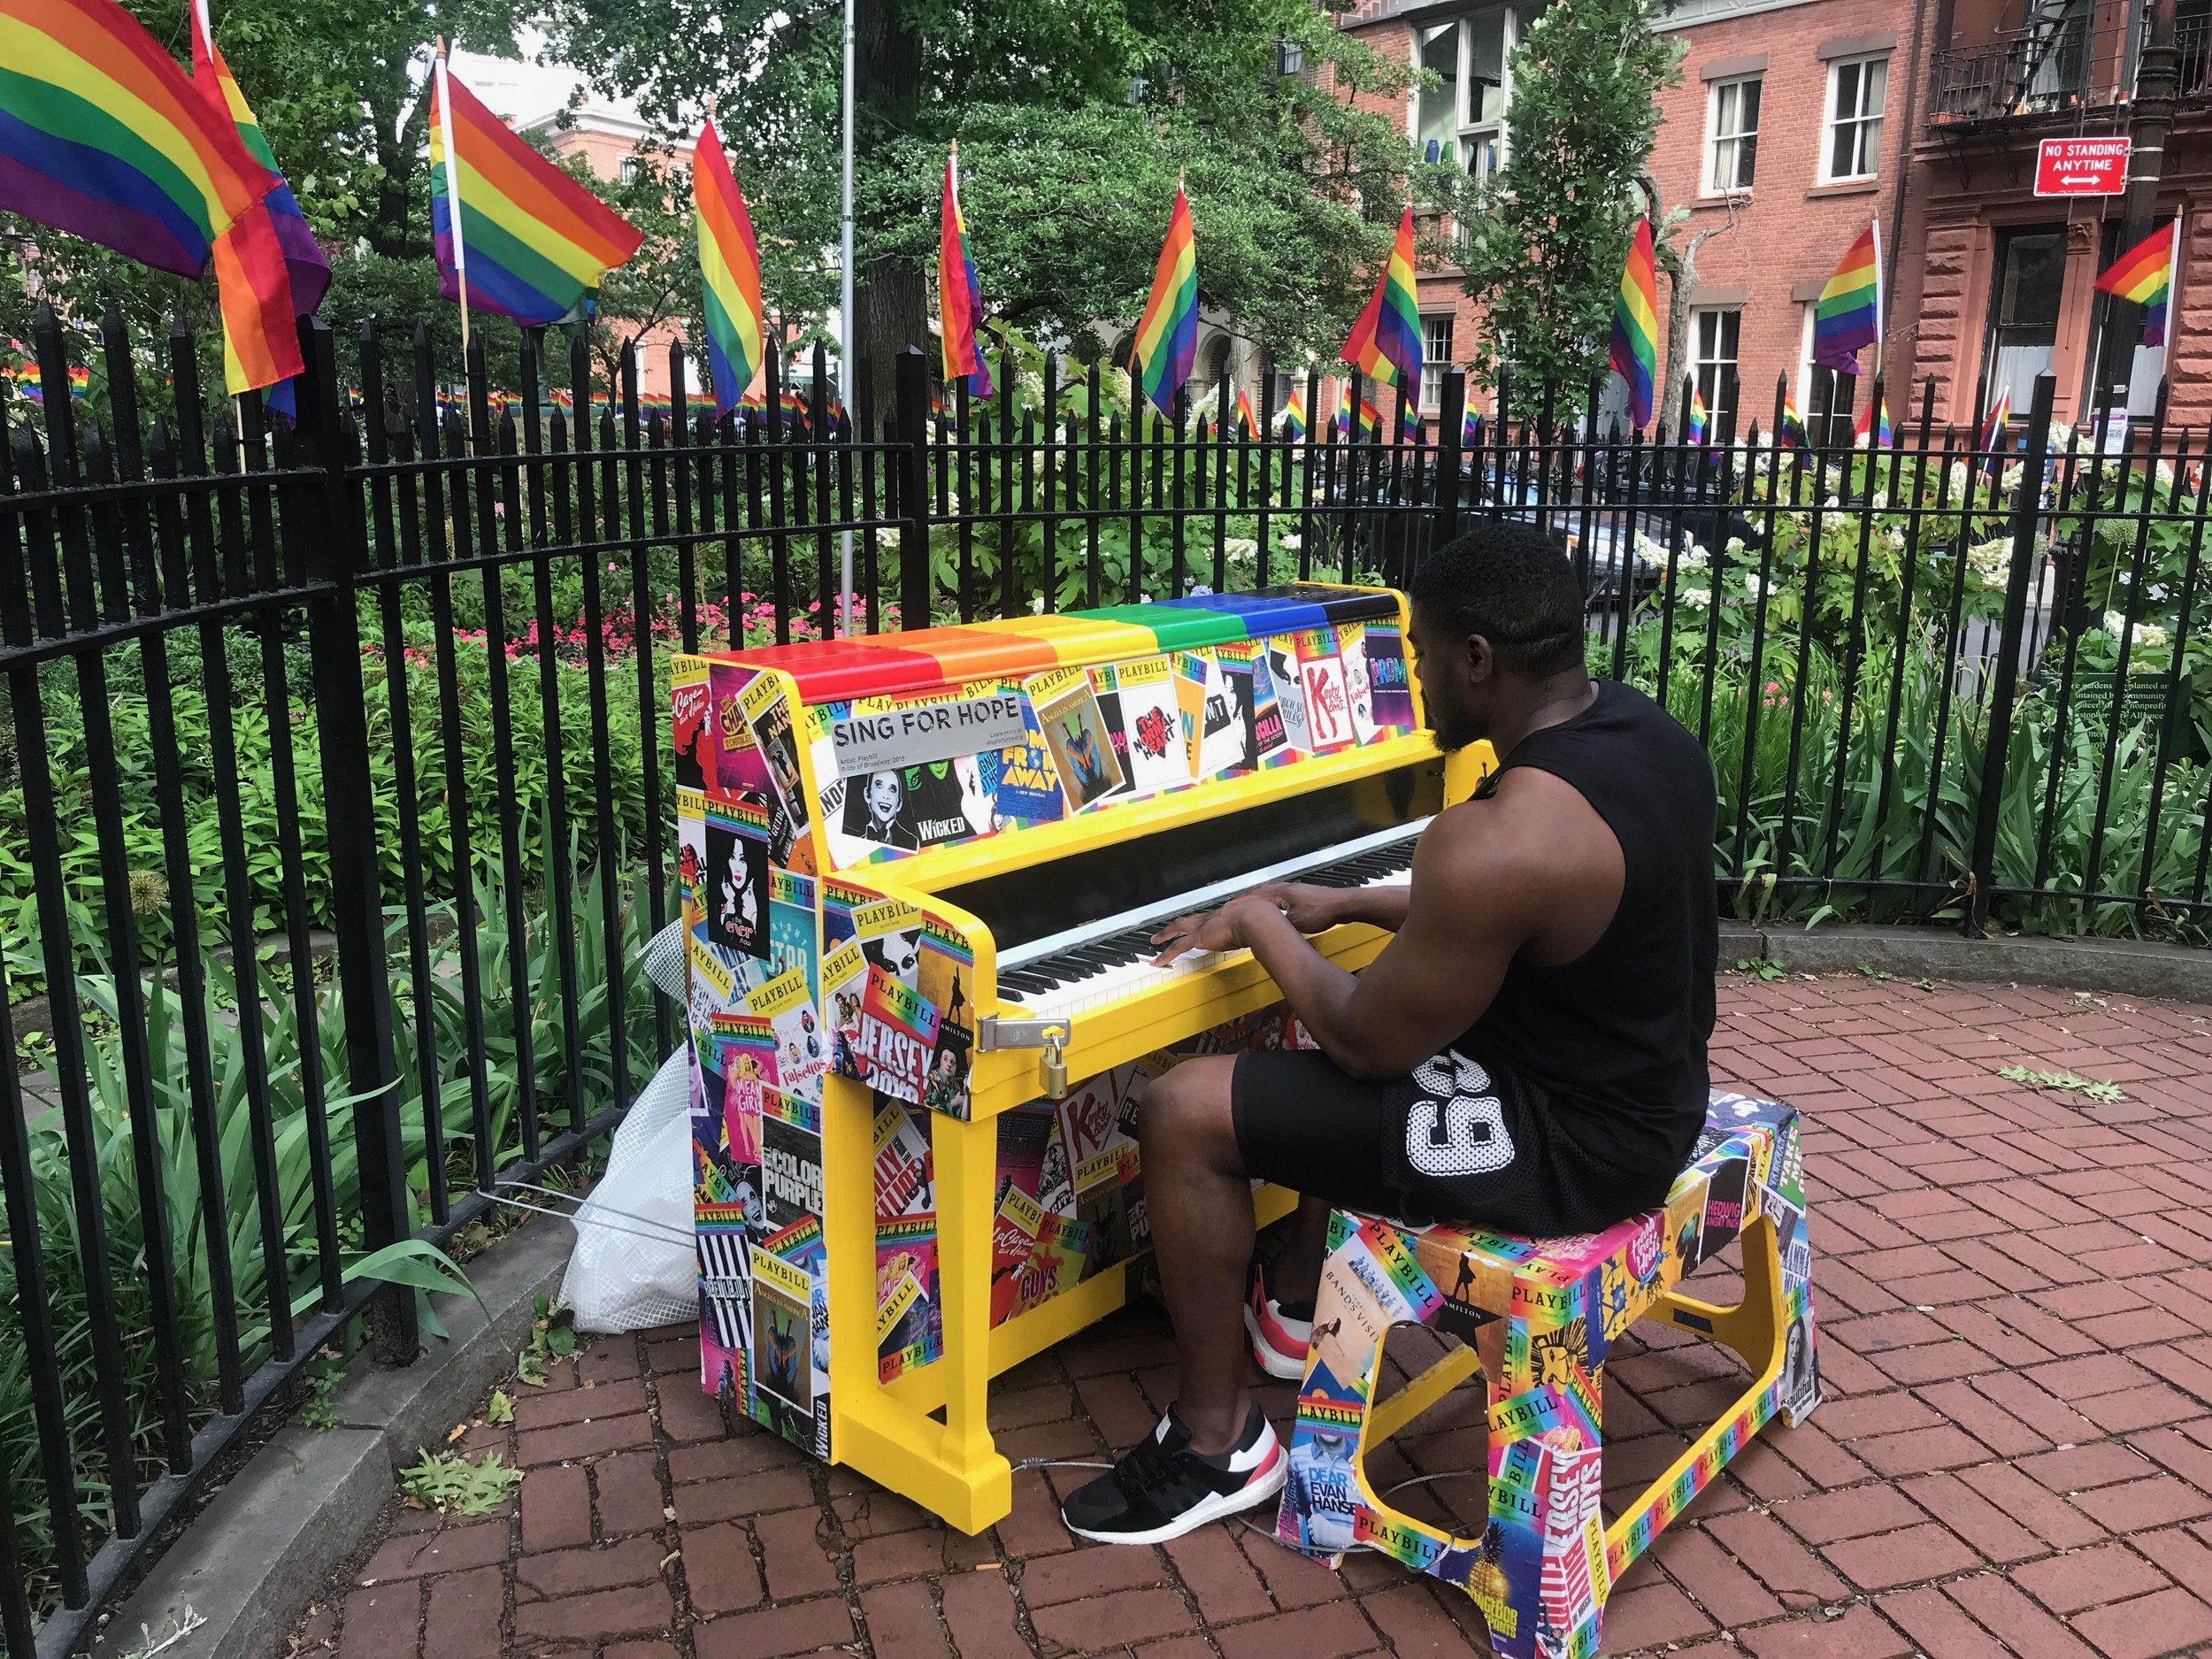  A piano player entertains visitors at Stonewall National Monument, across from the Stonewall Inn in New York's Greenwich Village. 